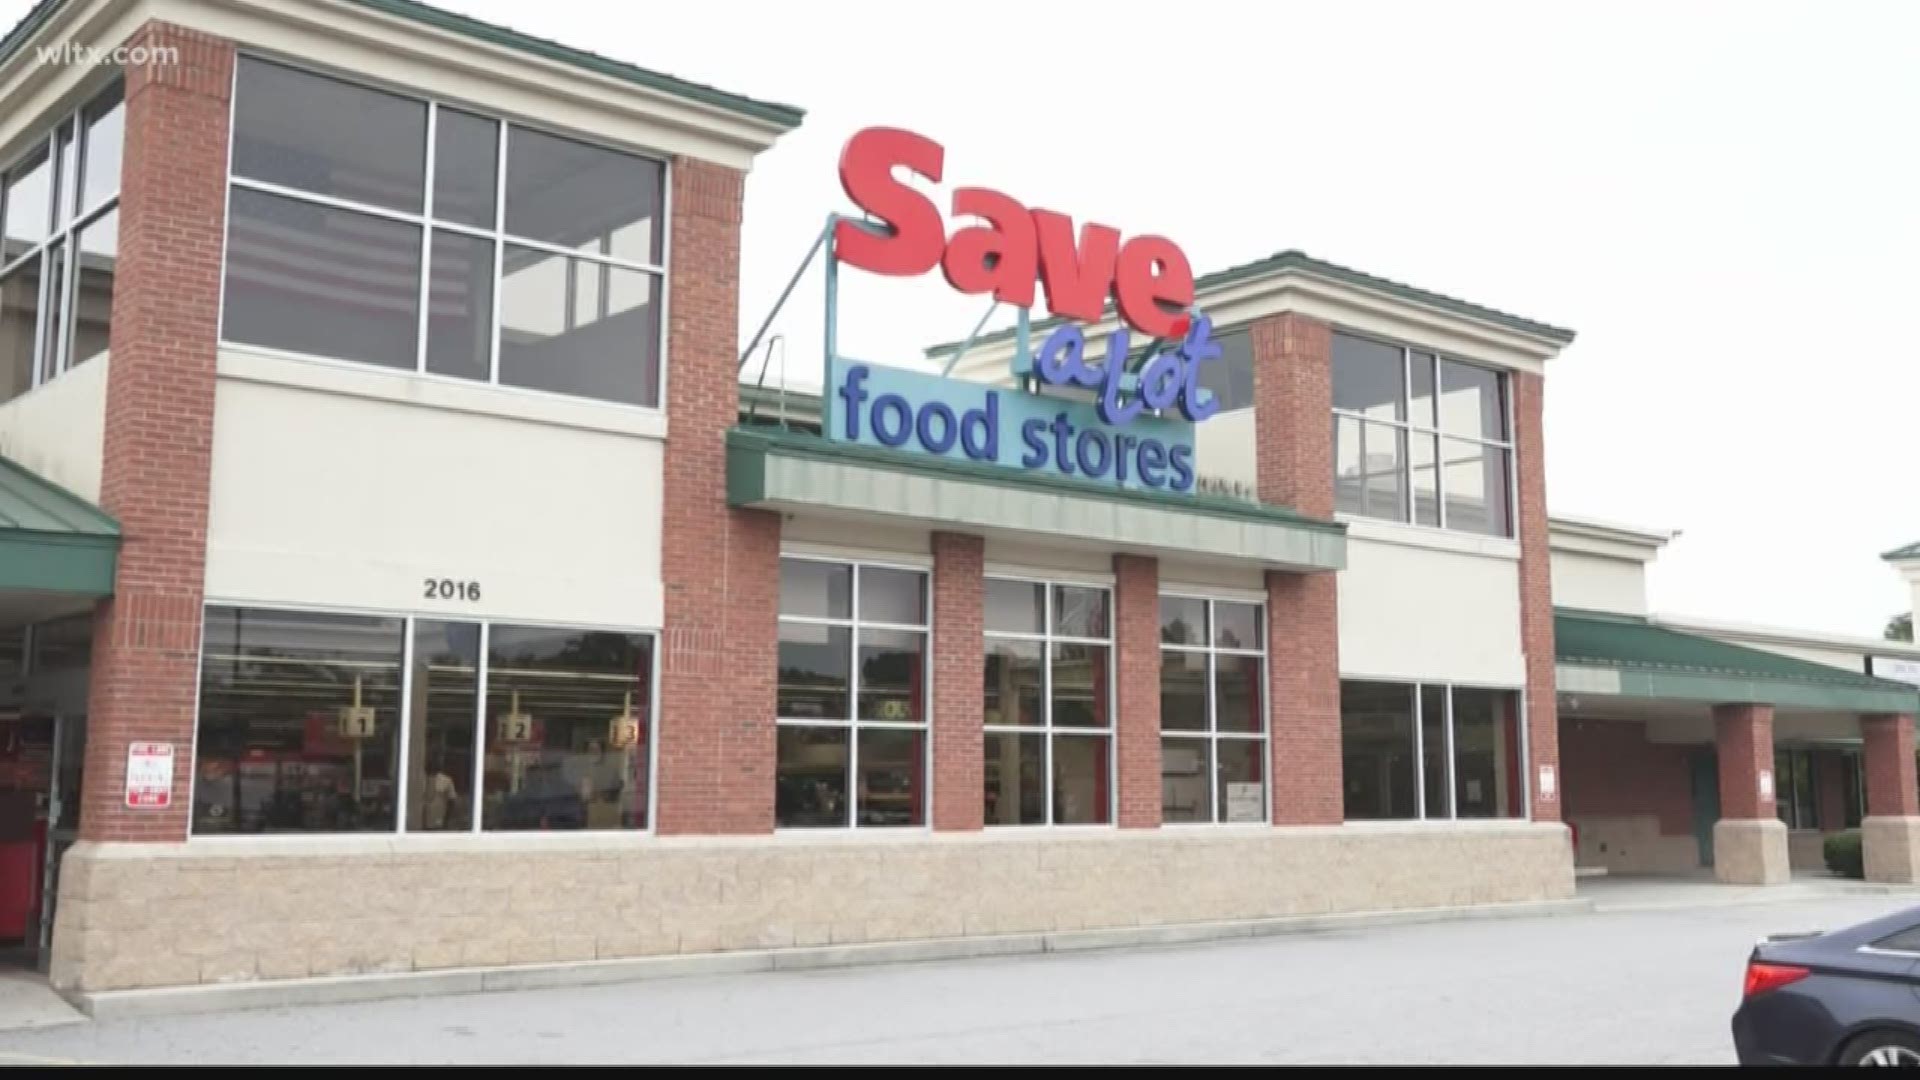 After months of uncertainty, the Celia Saxon community will be losing the Save A Lot grocery store. MORE: https://on.wltx.com/33EeoUM